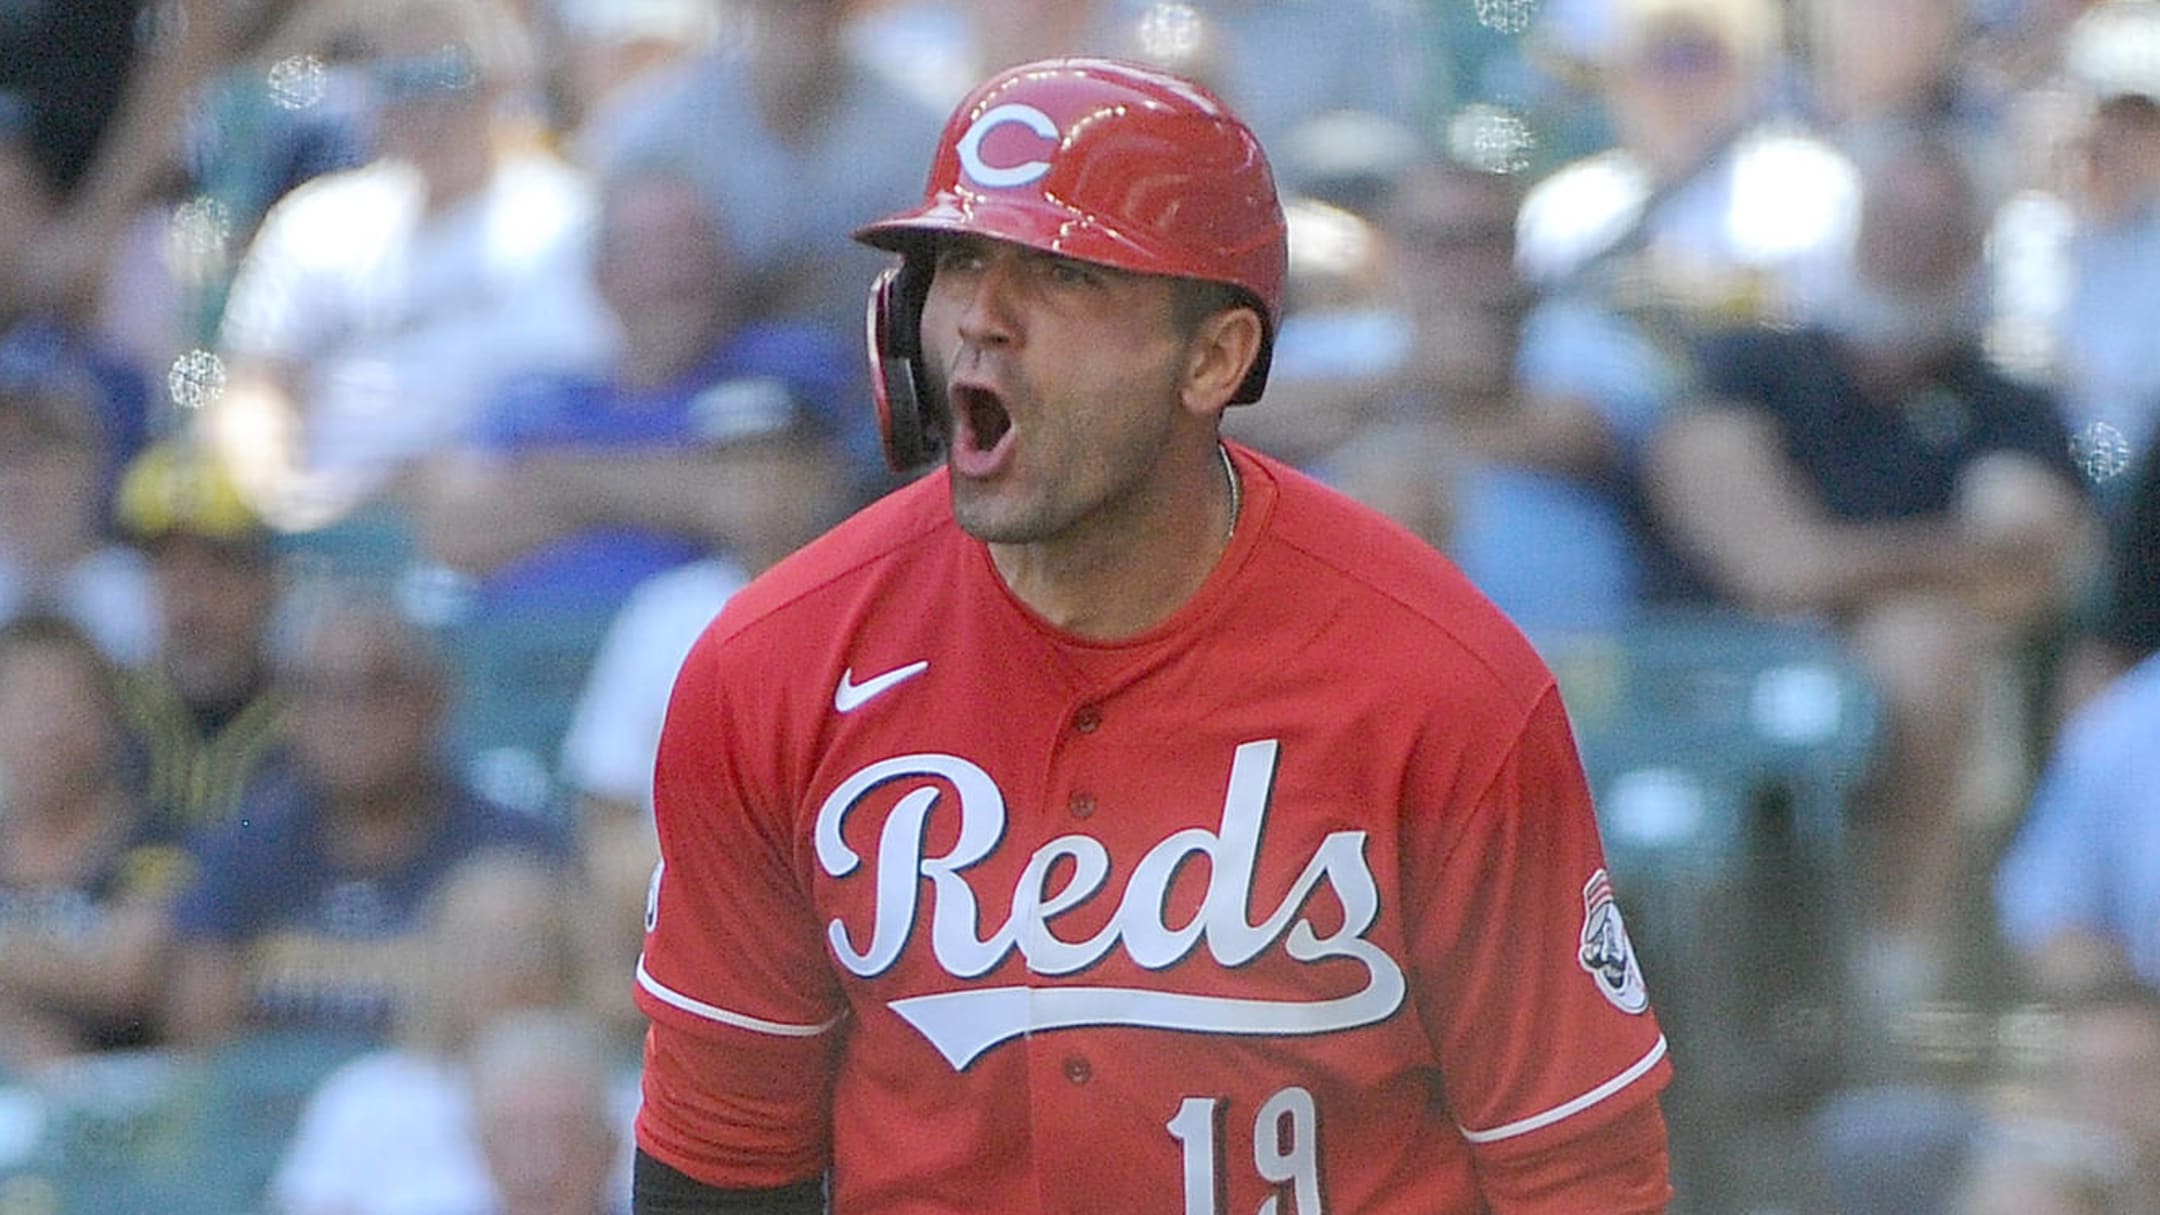 Joey Votto apologizes to tearful young Reds fan for ejection